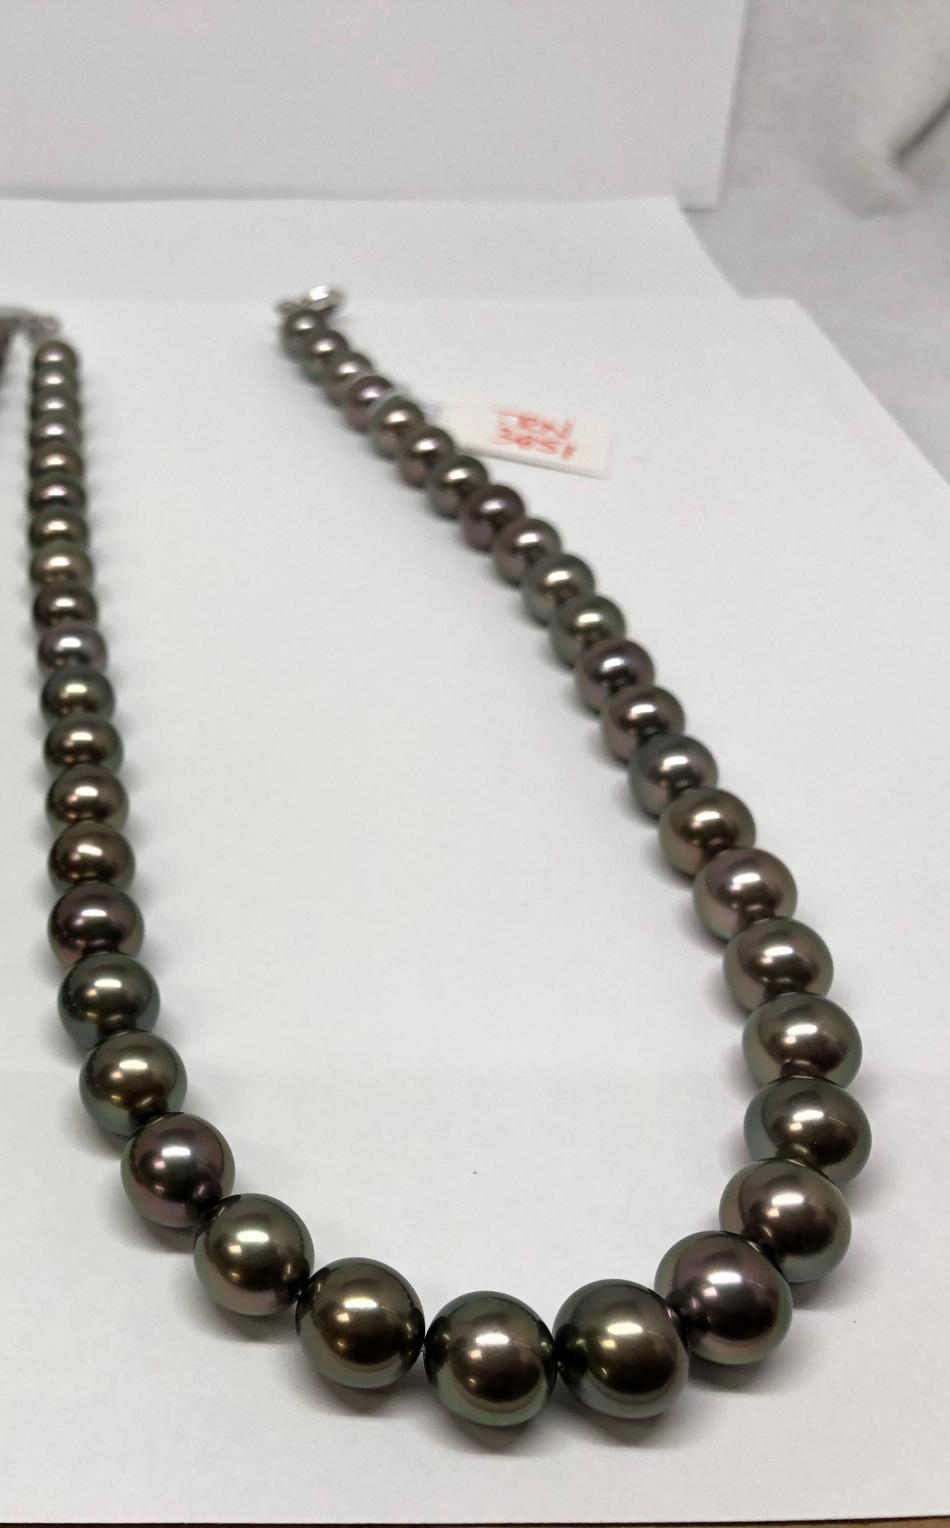 Tahitian pearl necklace with dark green tones